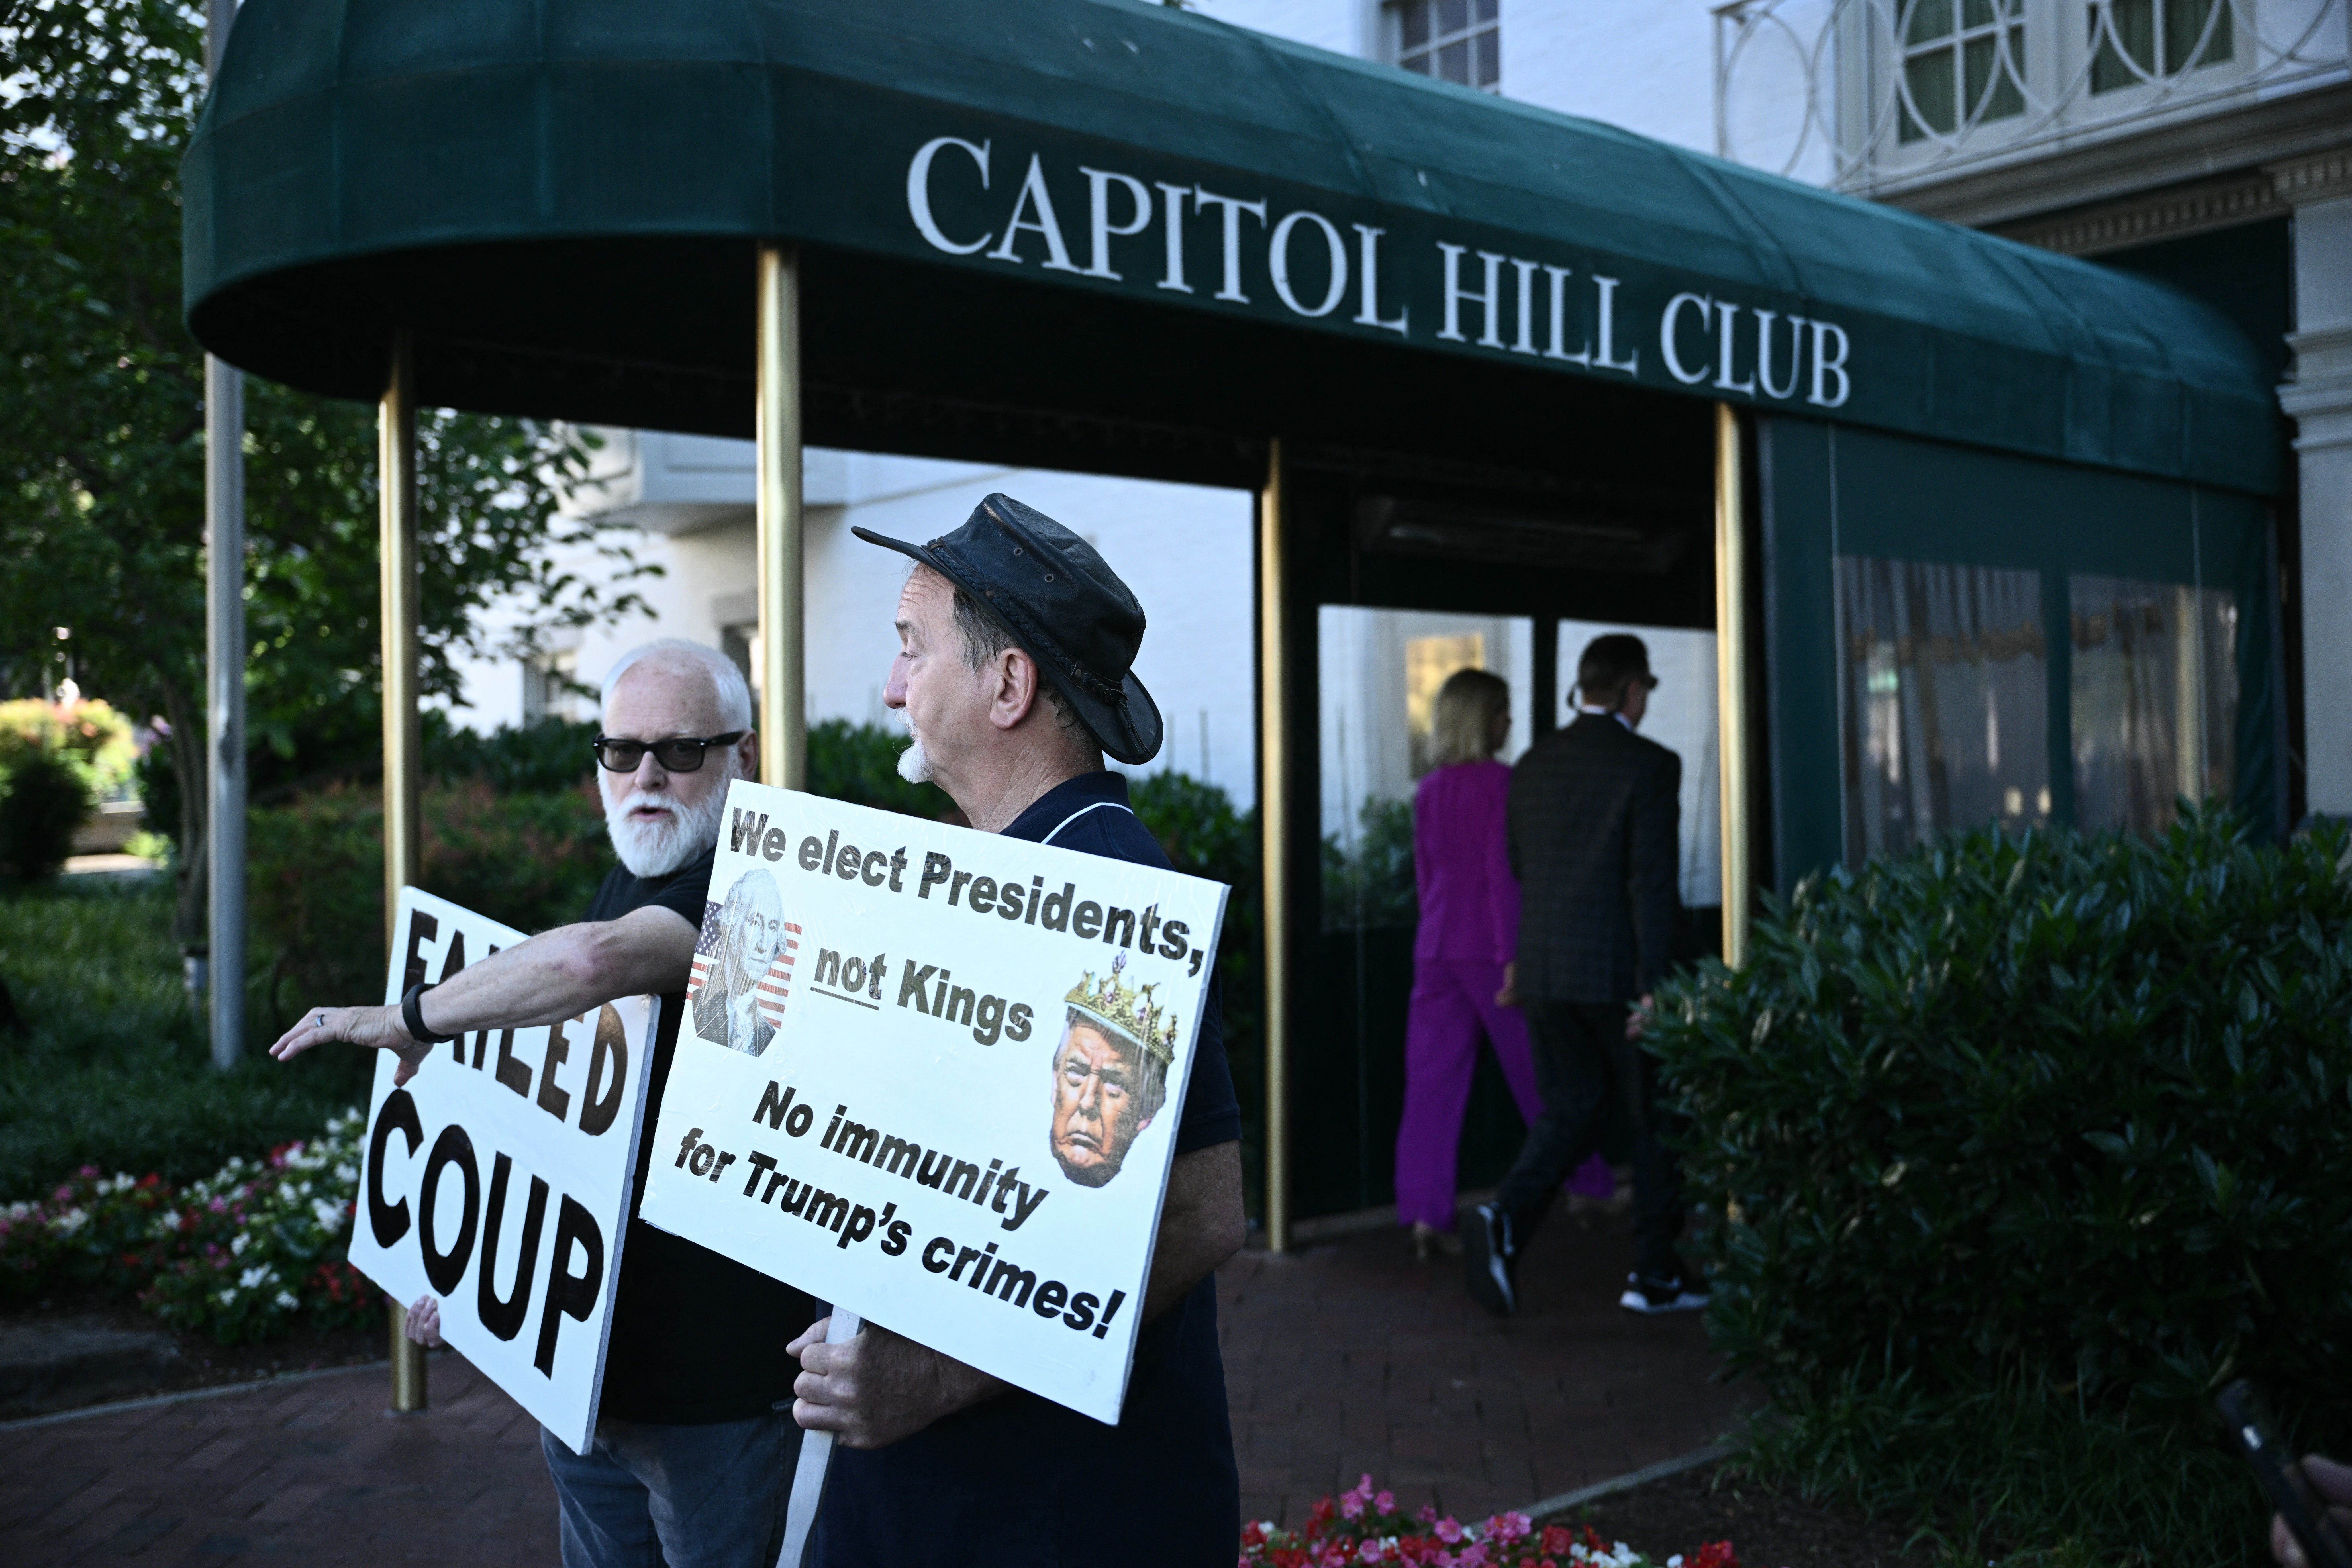 Protesters outside the Capitol Hill Club where Donald Trump will meet with Republican lawmakers to discuss his plans for a potential second term in the White House